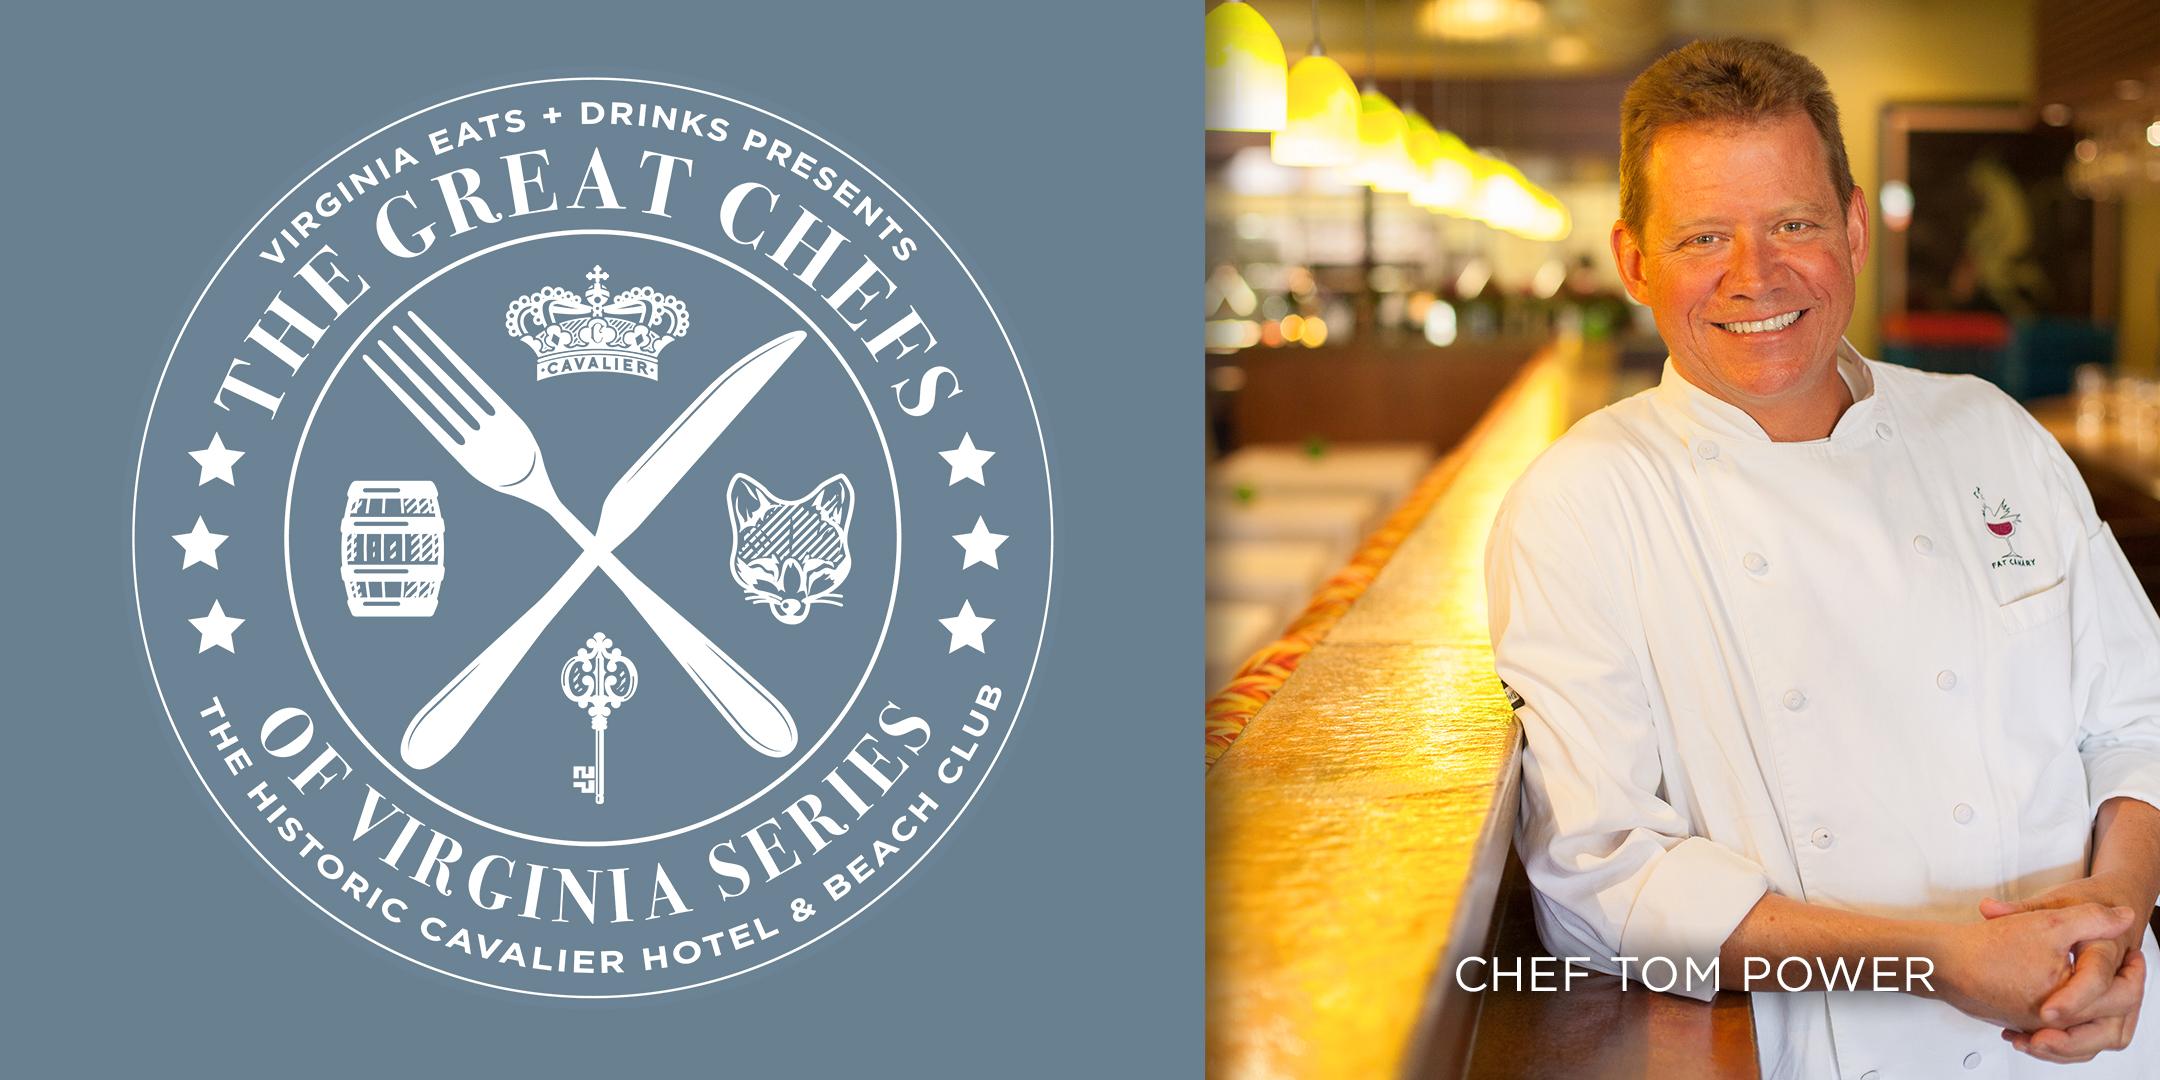 Great Chefs of Virginia Series: Chef Tom Power April 5